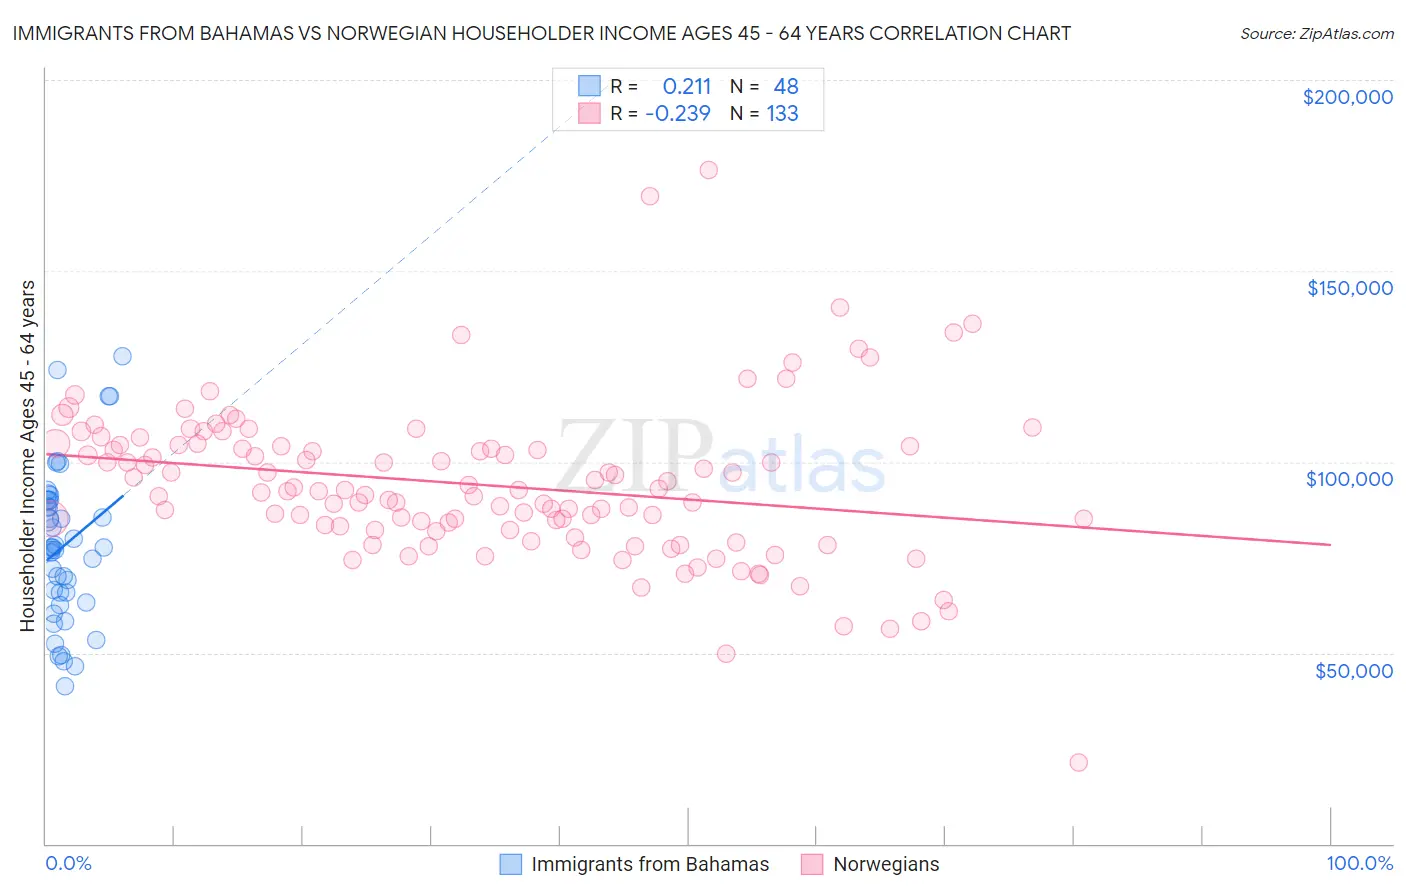 Immigrants from Bahamas vs Norwegian Householder Income Ages 45 - 64 years